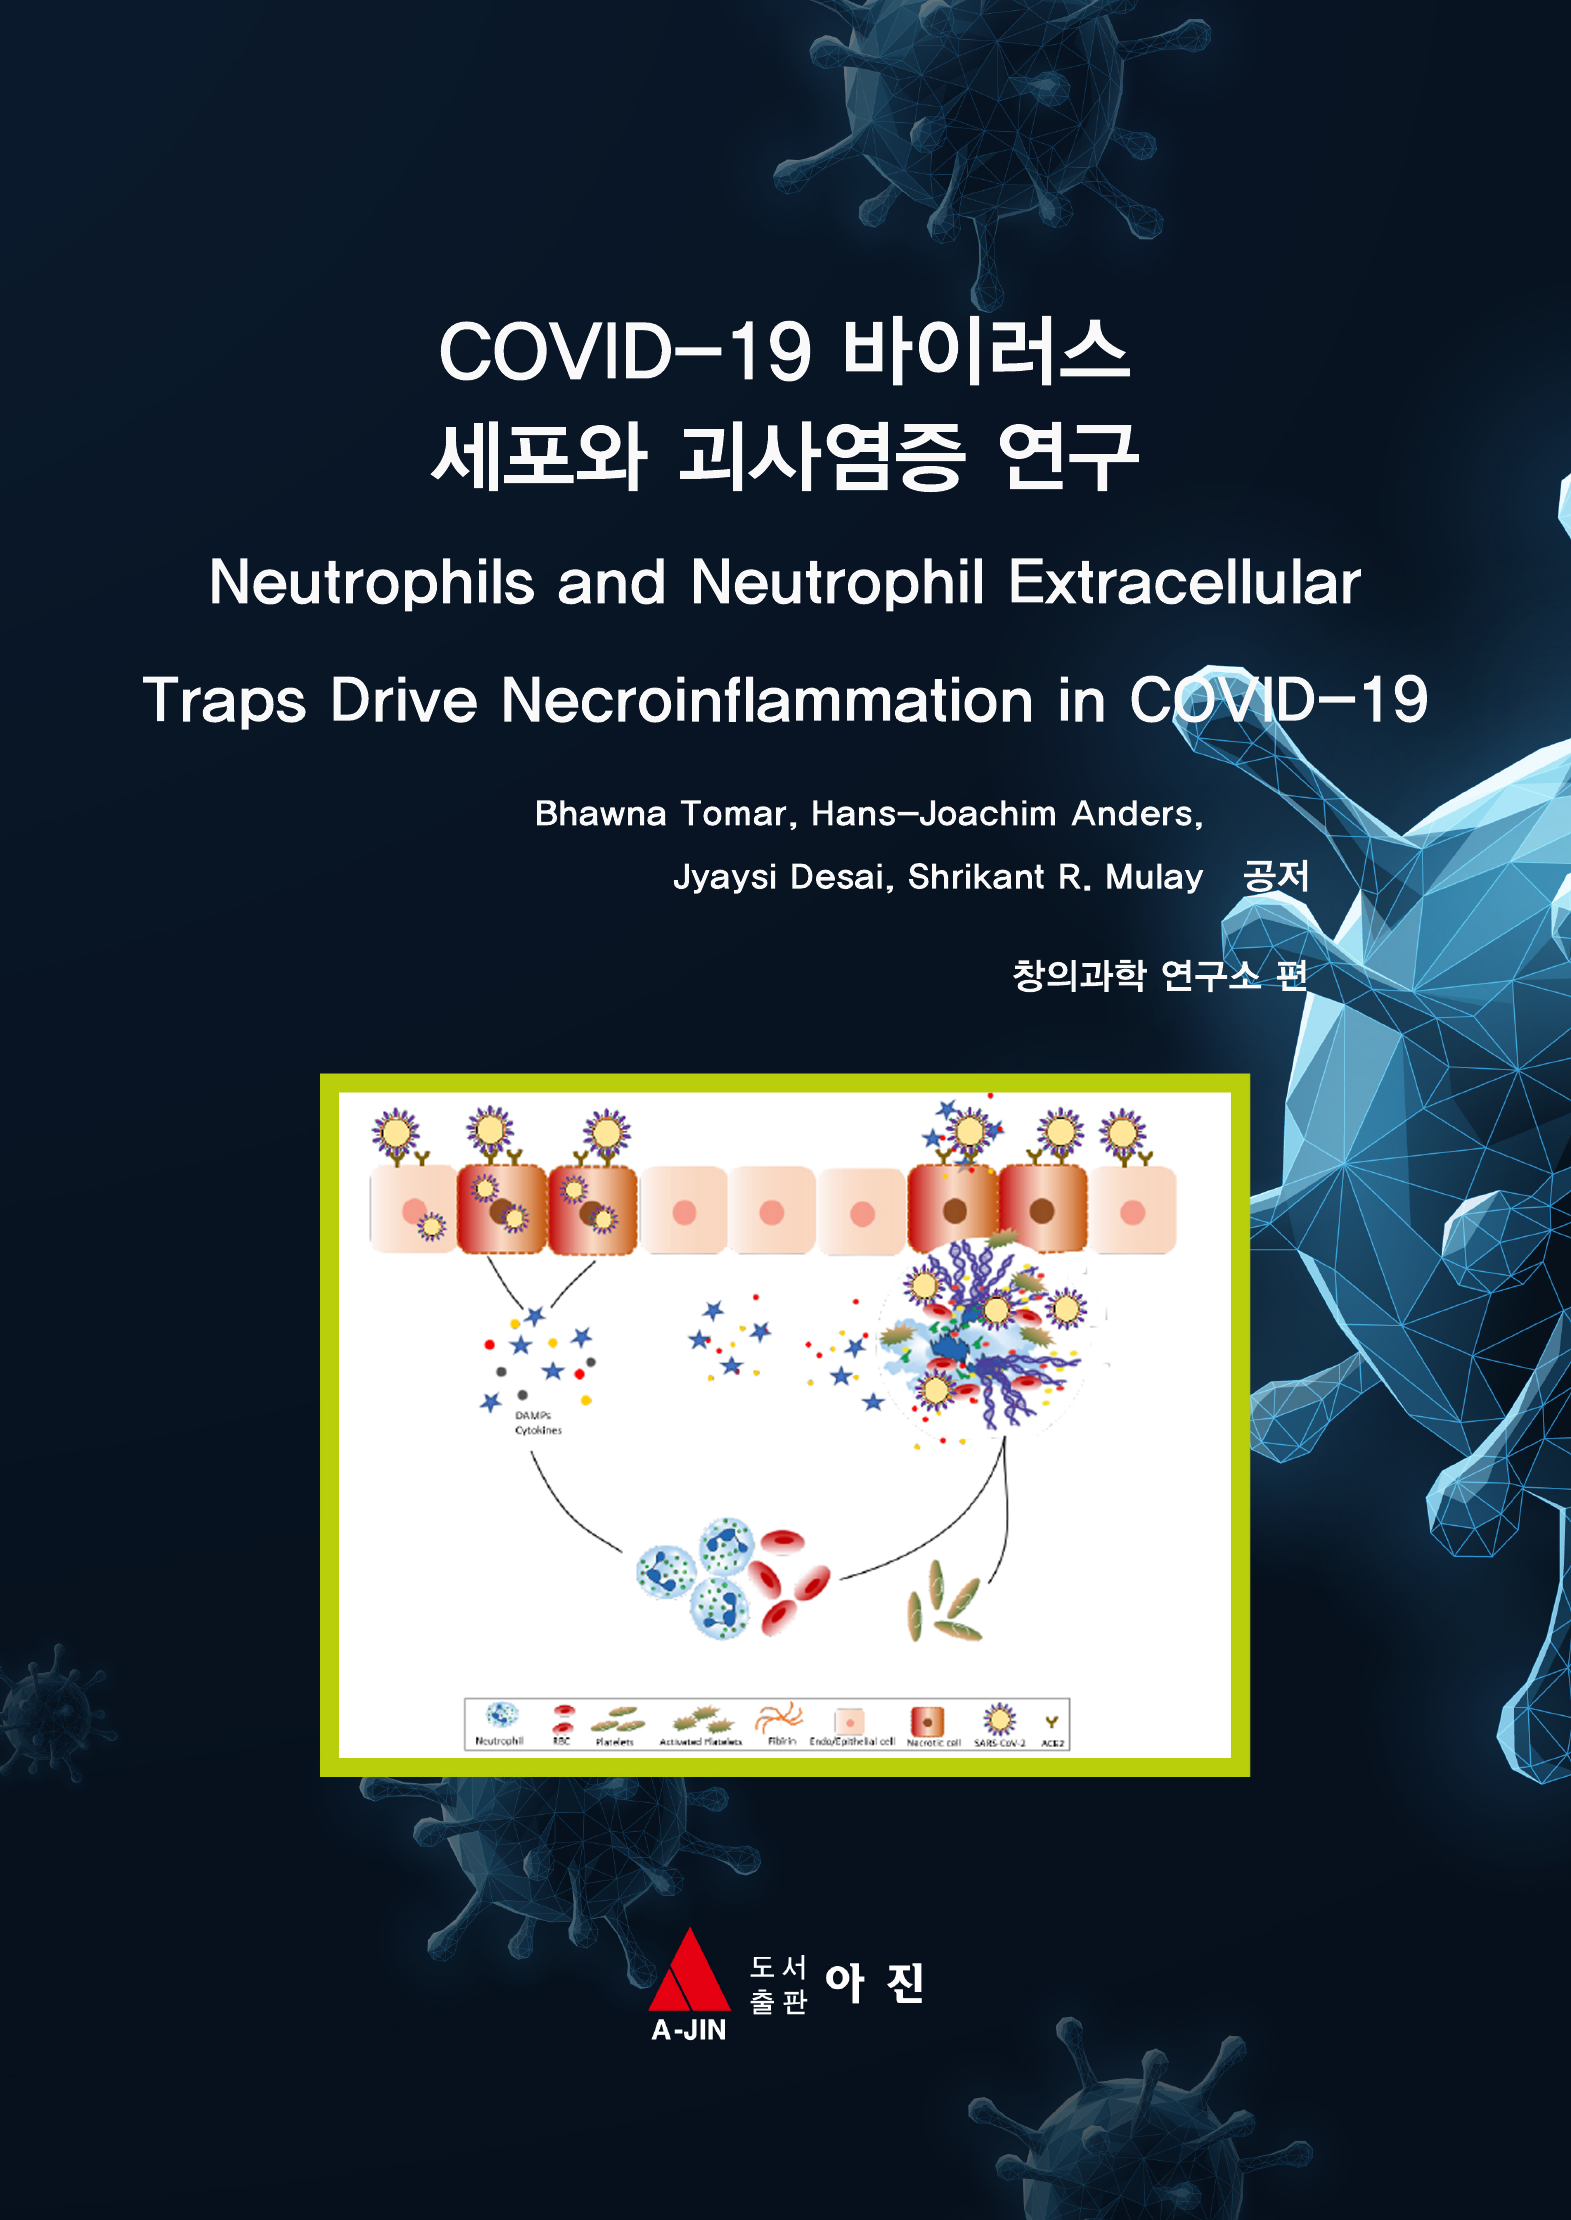 COVID-19 바이러스 세포와 괴사염증 연구 (Neutrophils and Neutrophil Extracellular Traps Drive Necroinflammation in COVID-19)